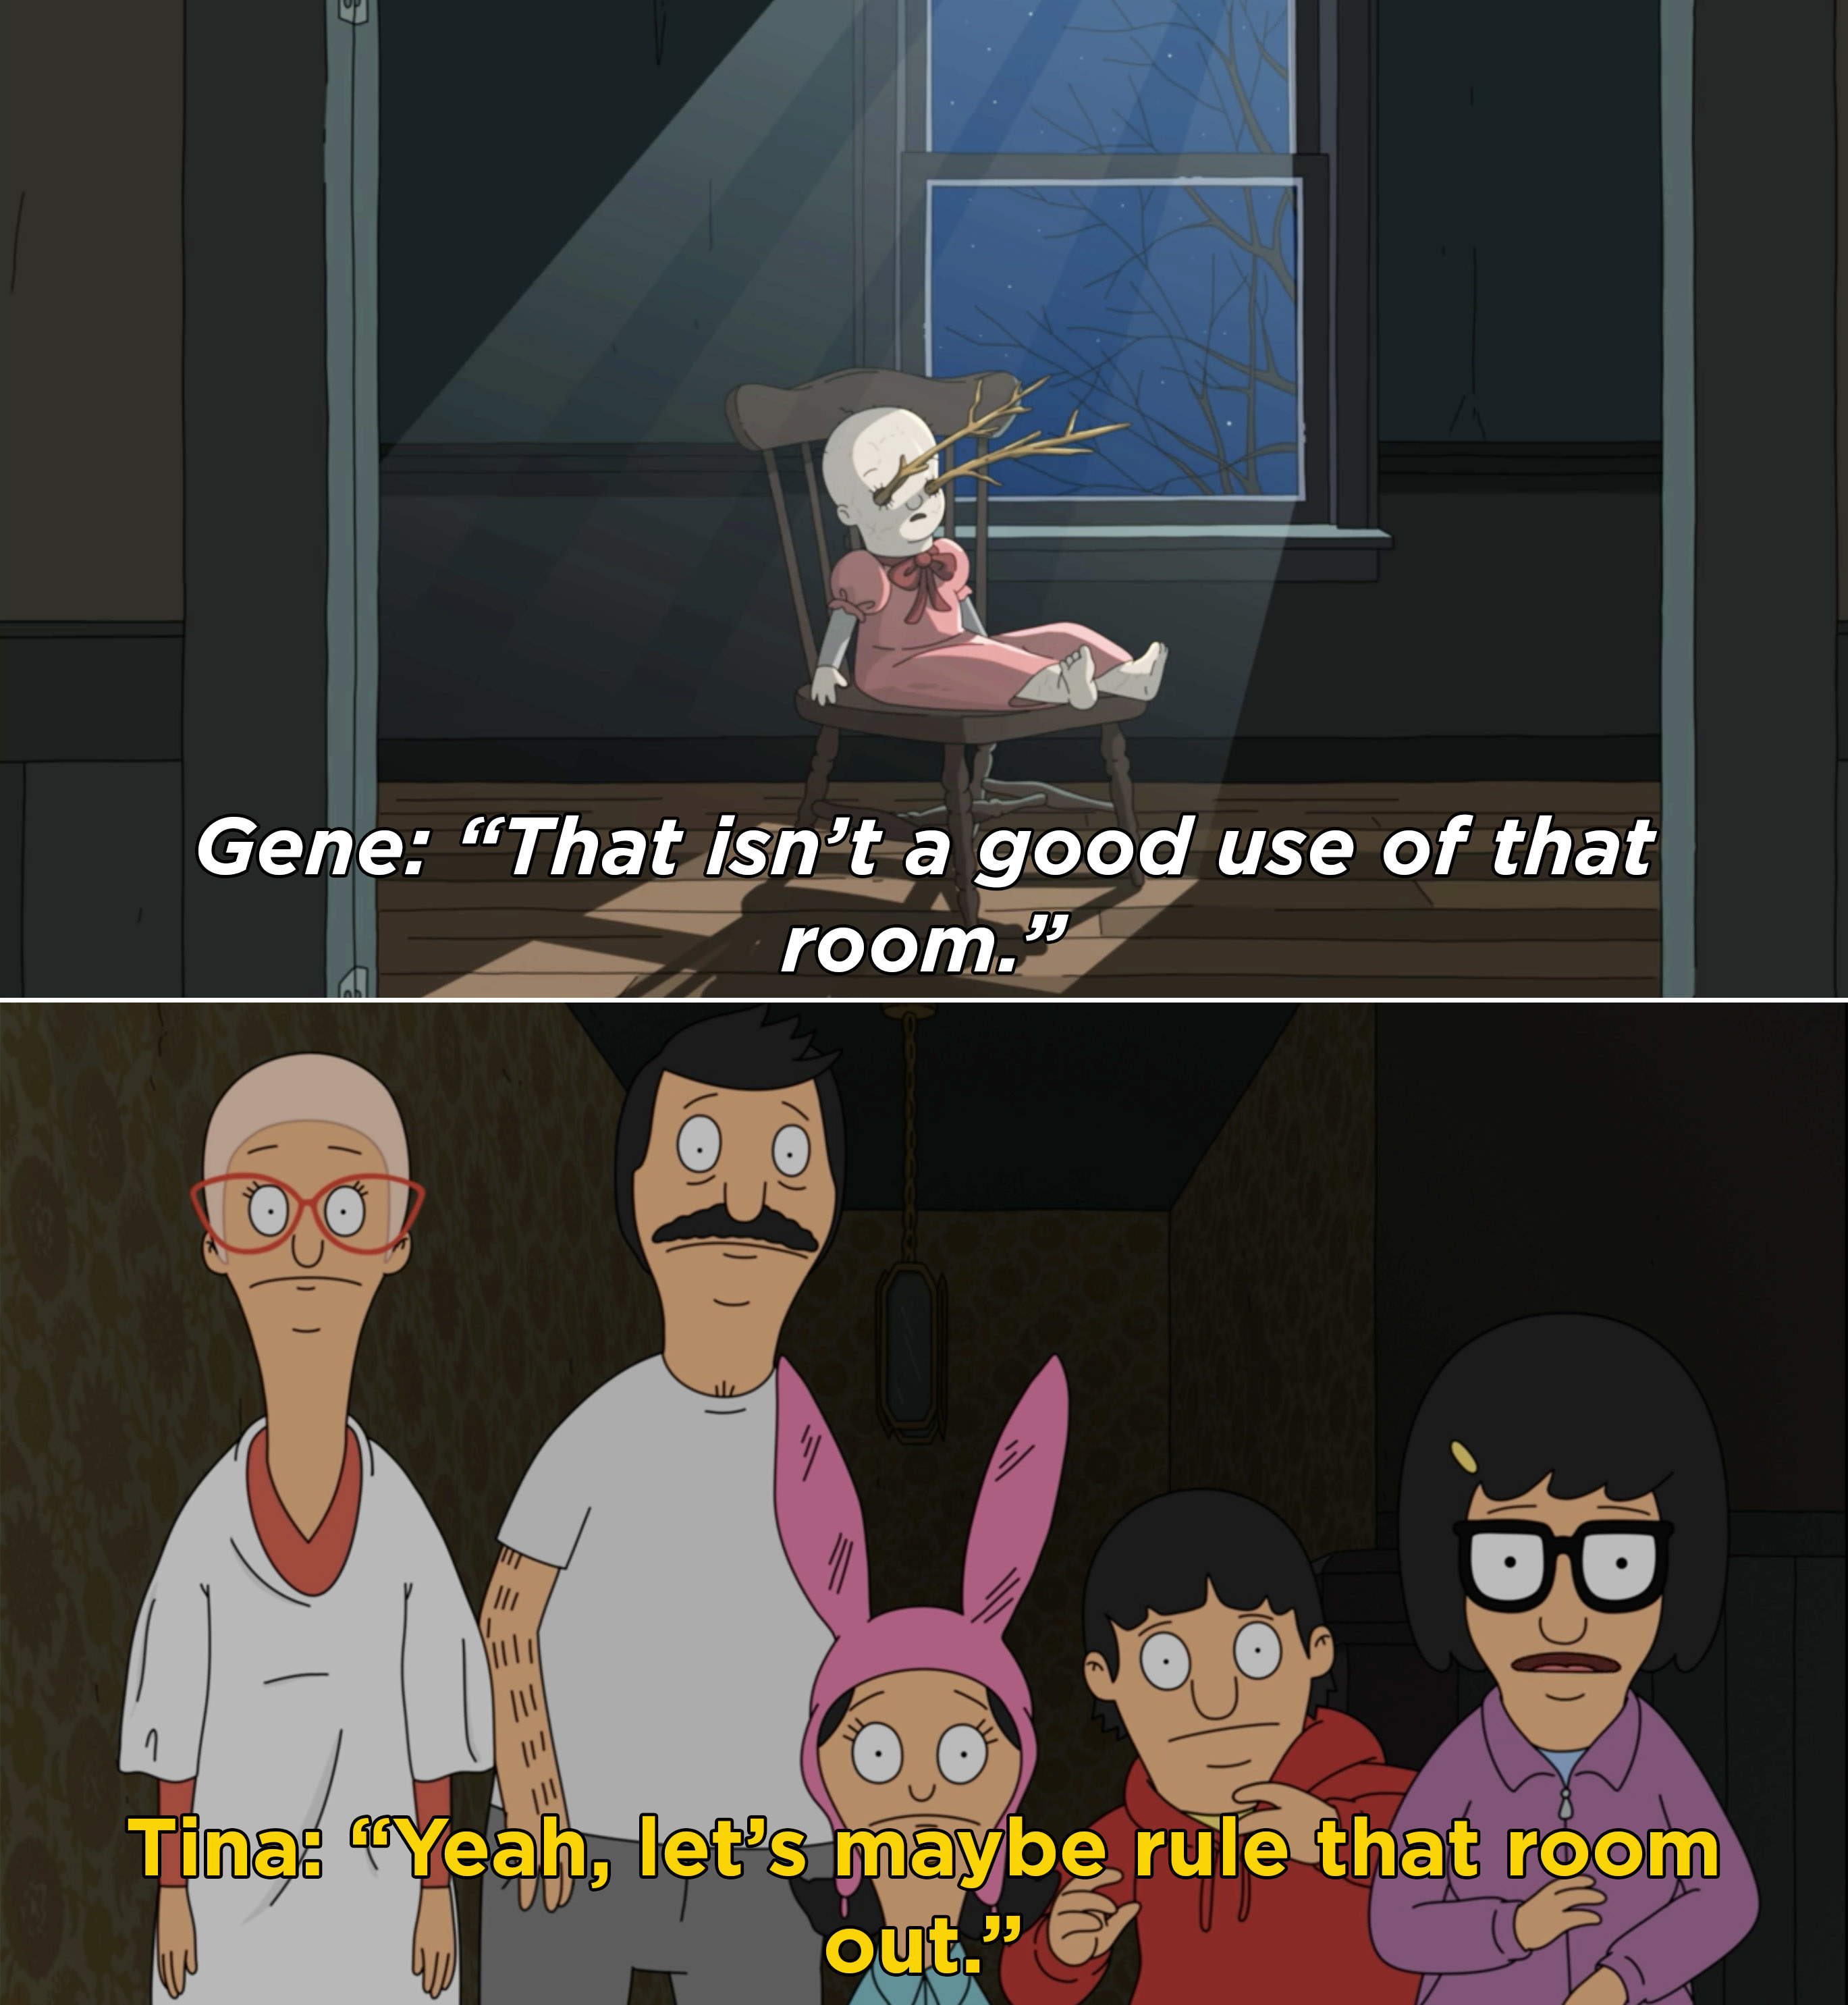 The Belchers seeing a creepy doll in a room and Tina suggesting they avoid it